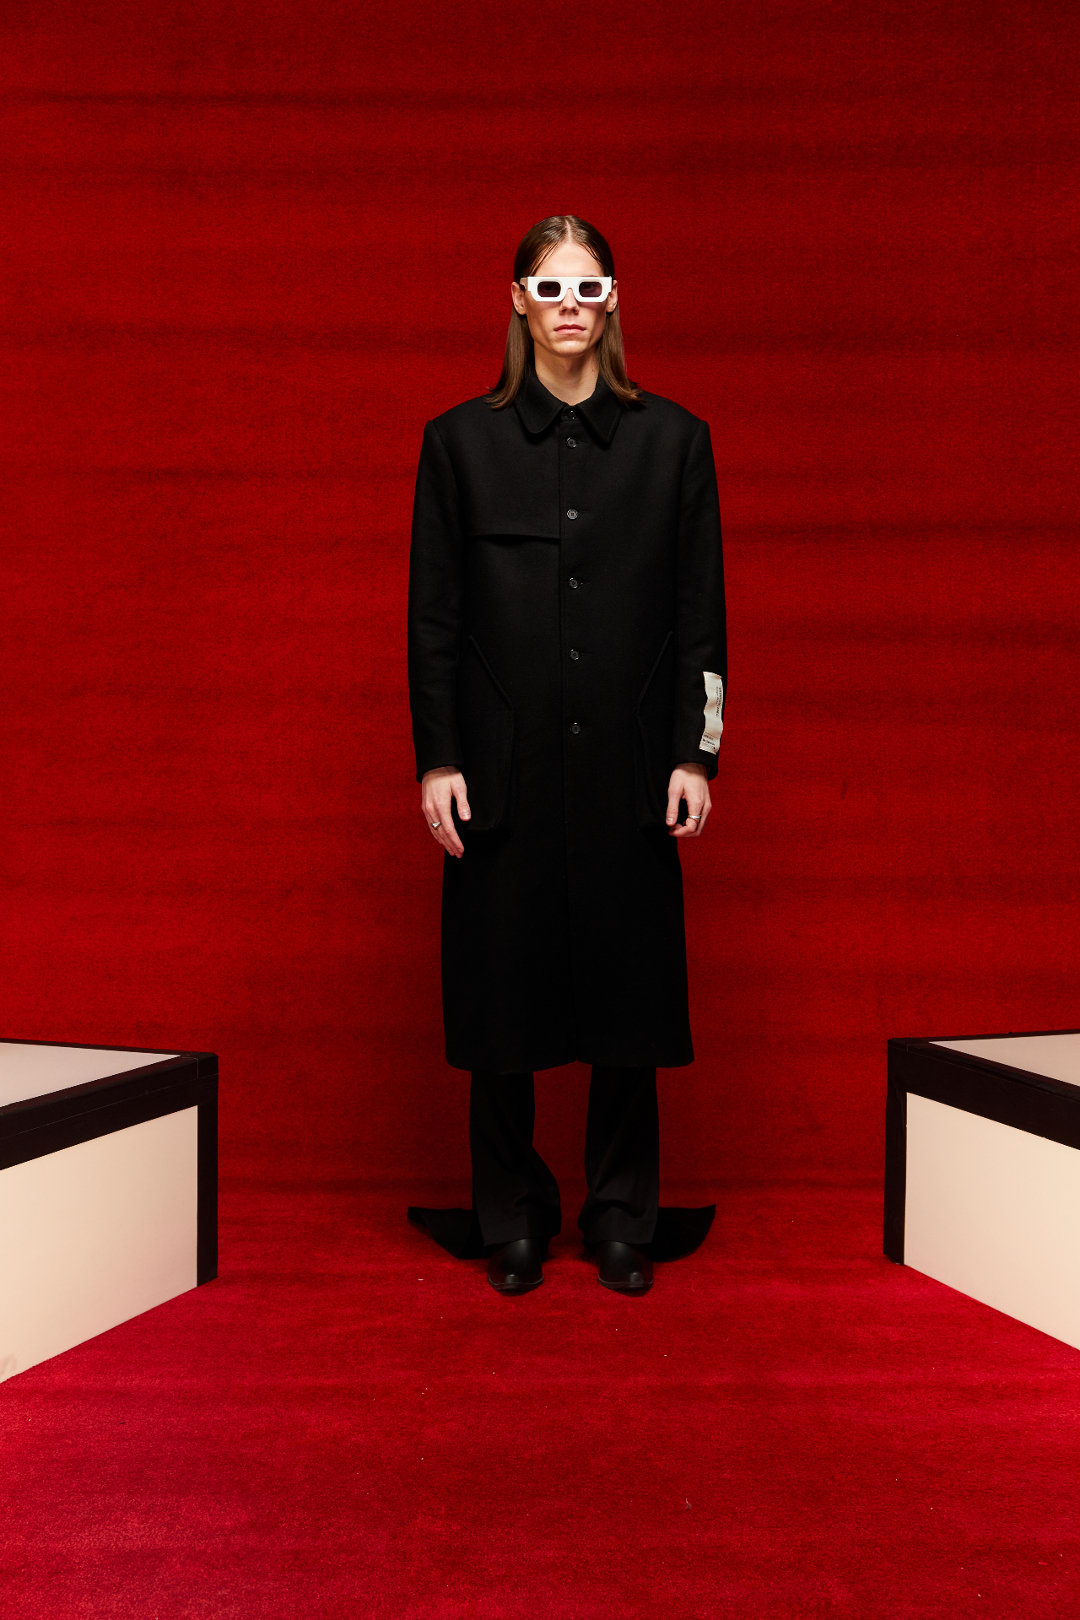 A person displaying a look from Mr. Saturday&#x27;s Fall/Winter 2022 collection. They are wearing a long black coat, black pants, and a black button up.